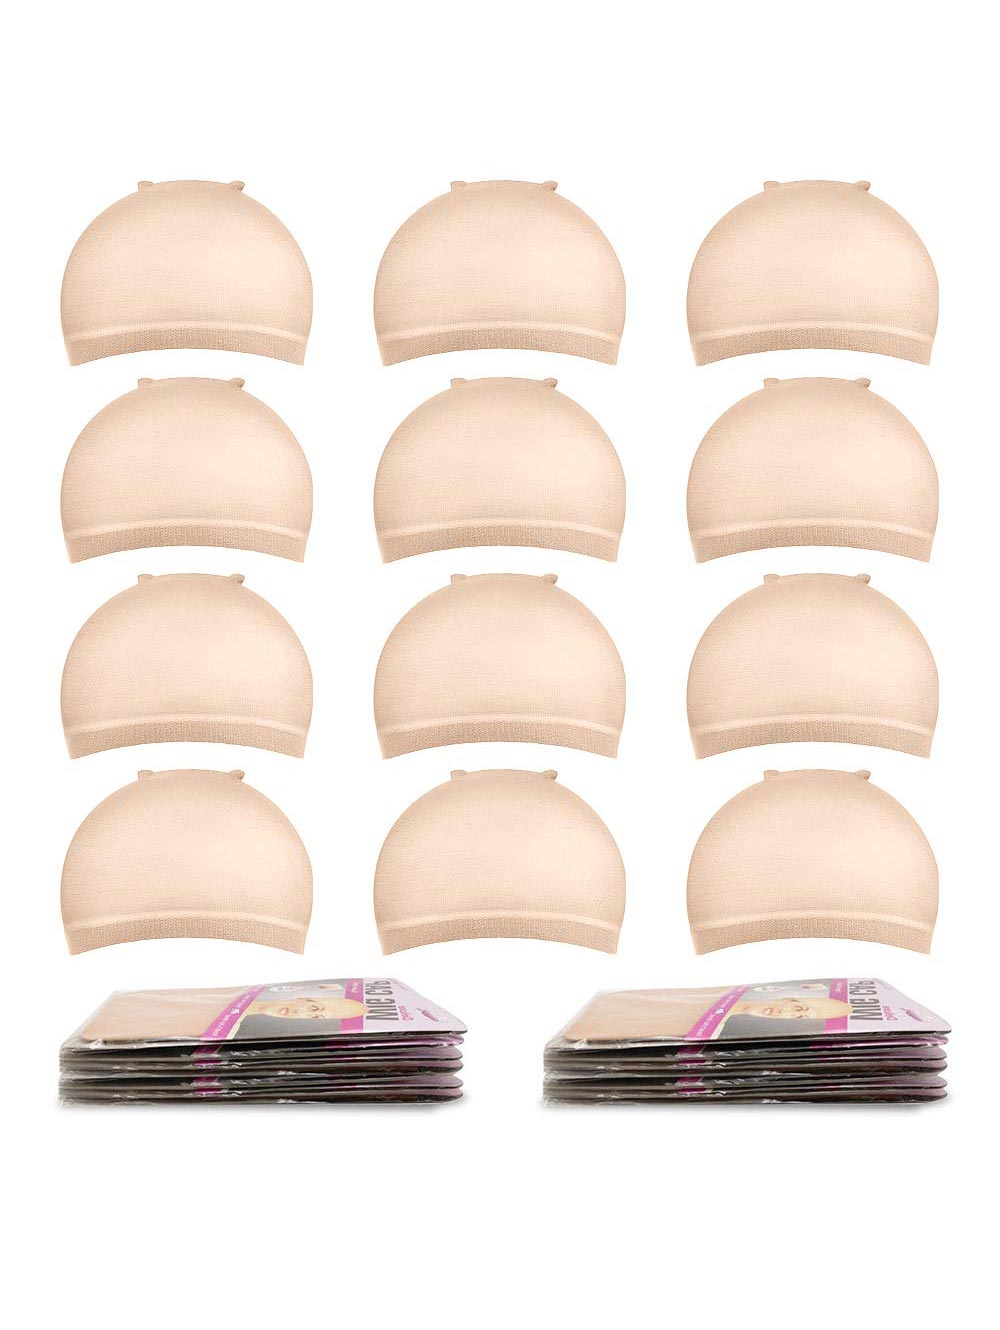 2 pieces Light Brown Stocking Wig Caps Stretchy Nylon Wig Caps for Women